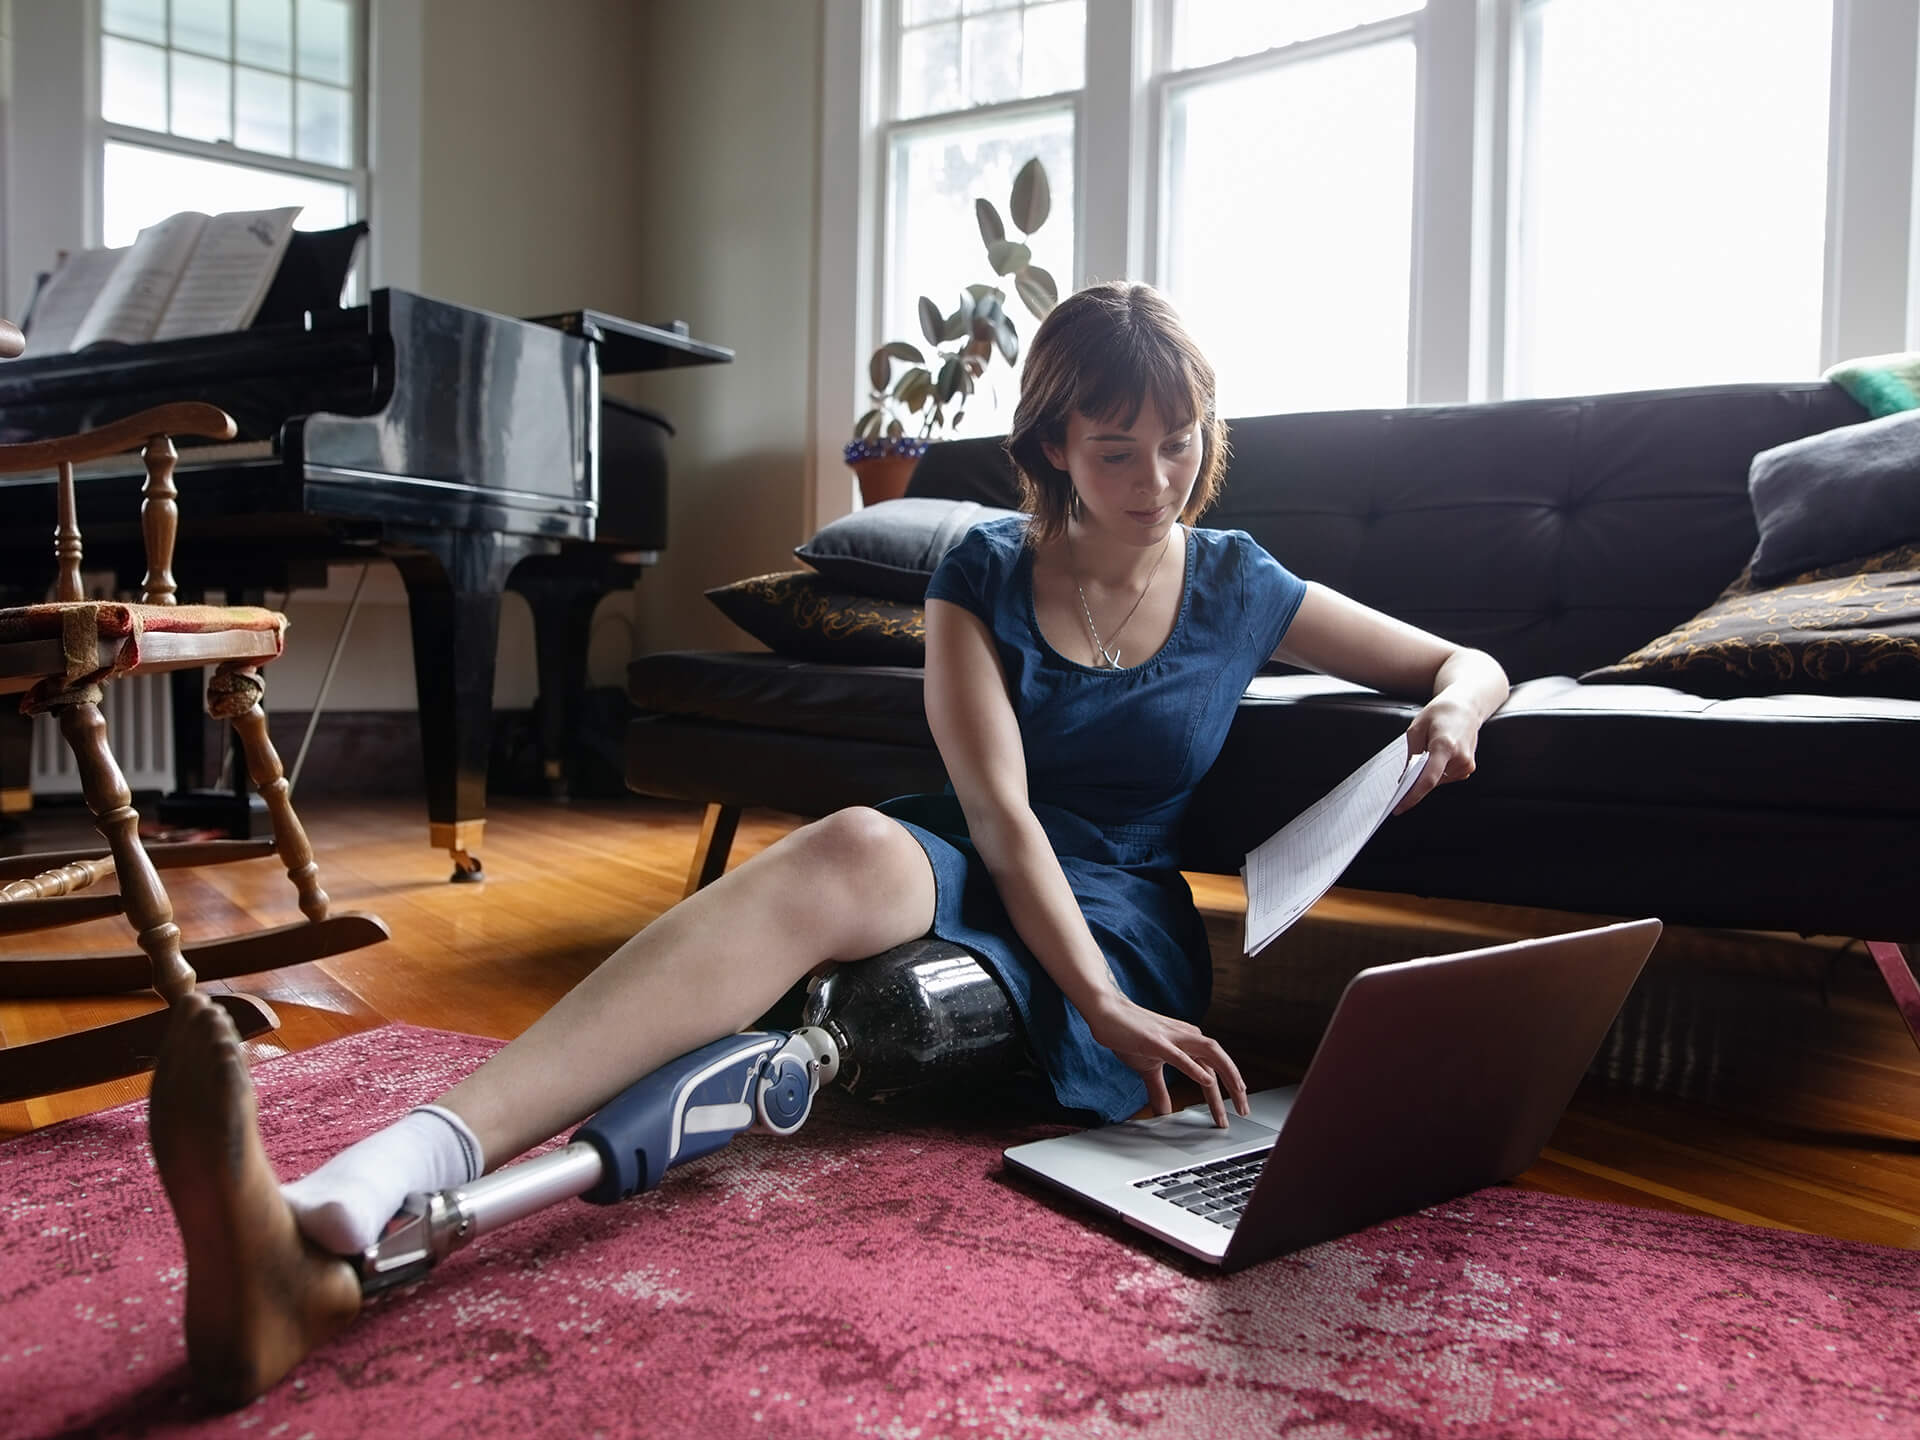 Woman sitting on floor looking at laptop.